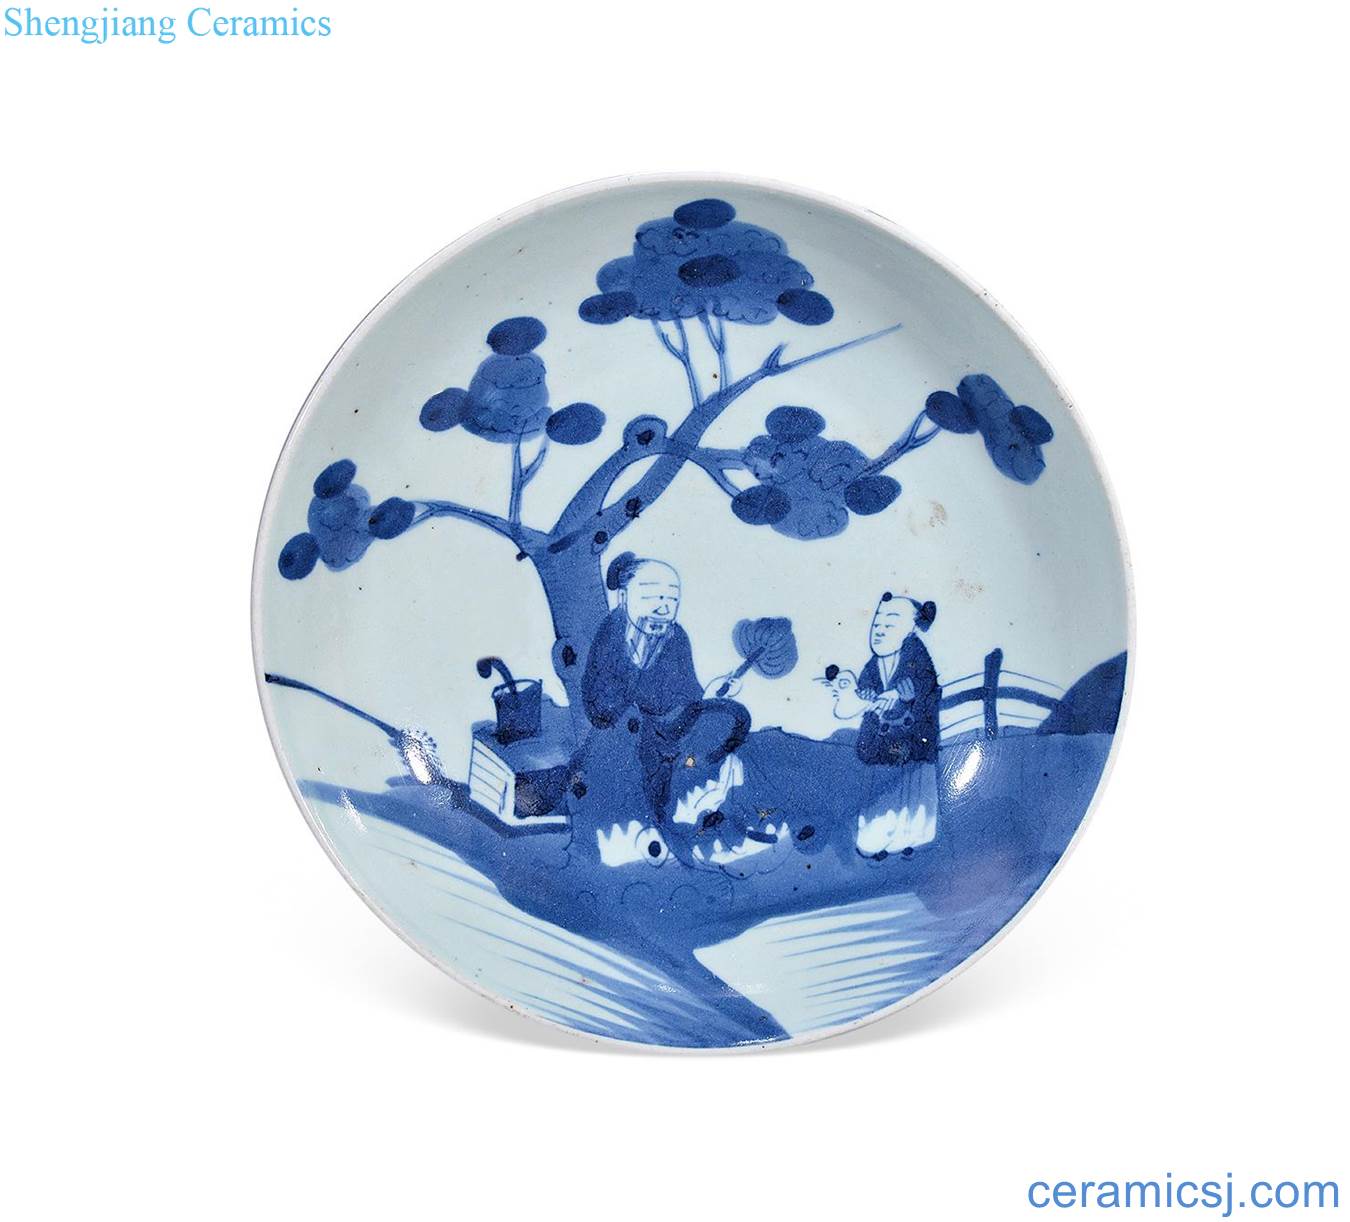 Qing daoguang Stories of blue and white plate